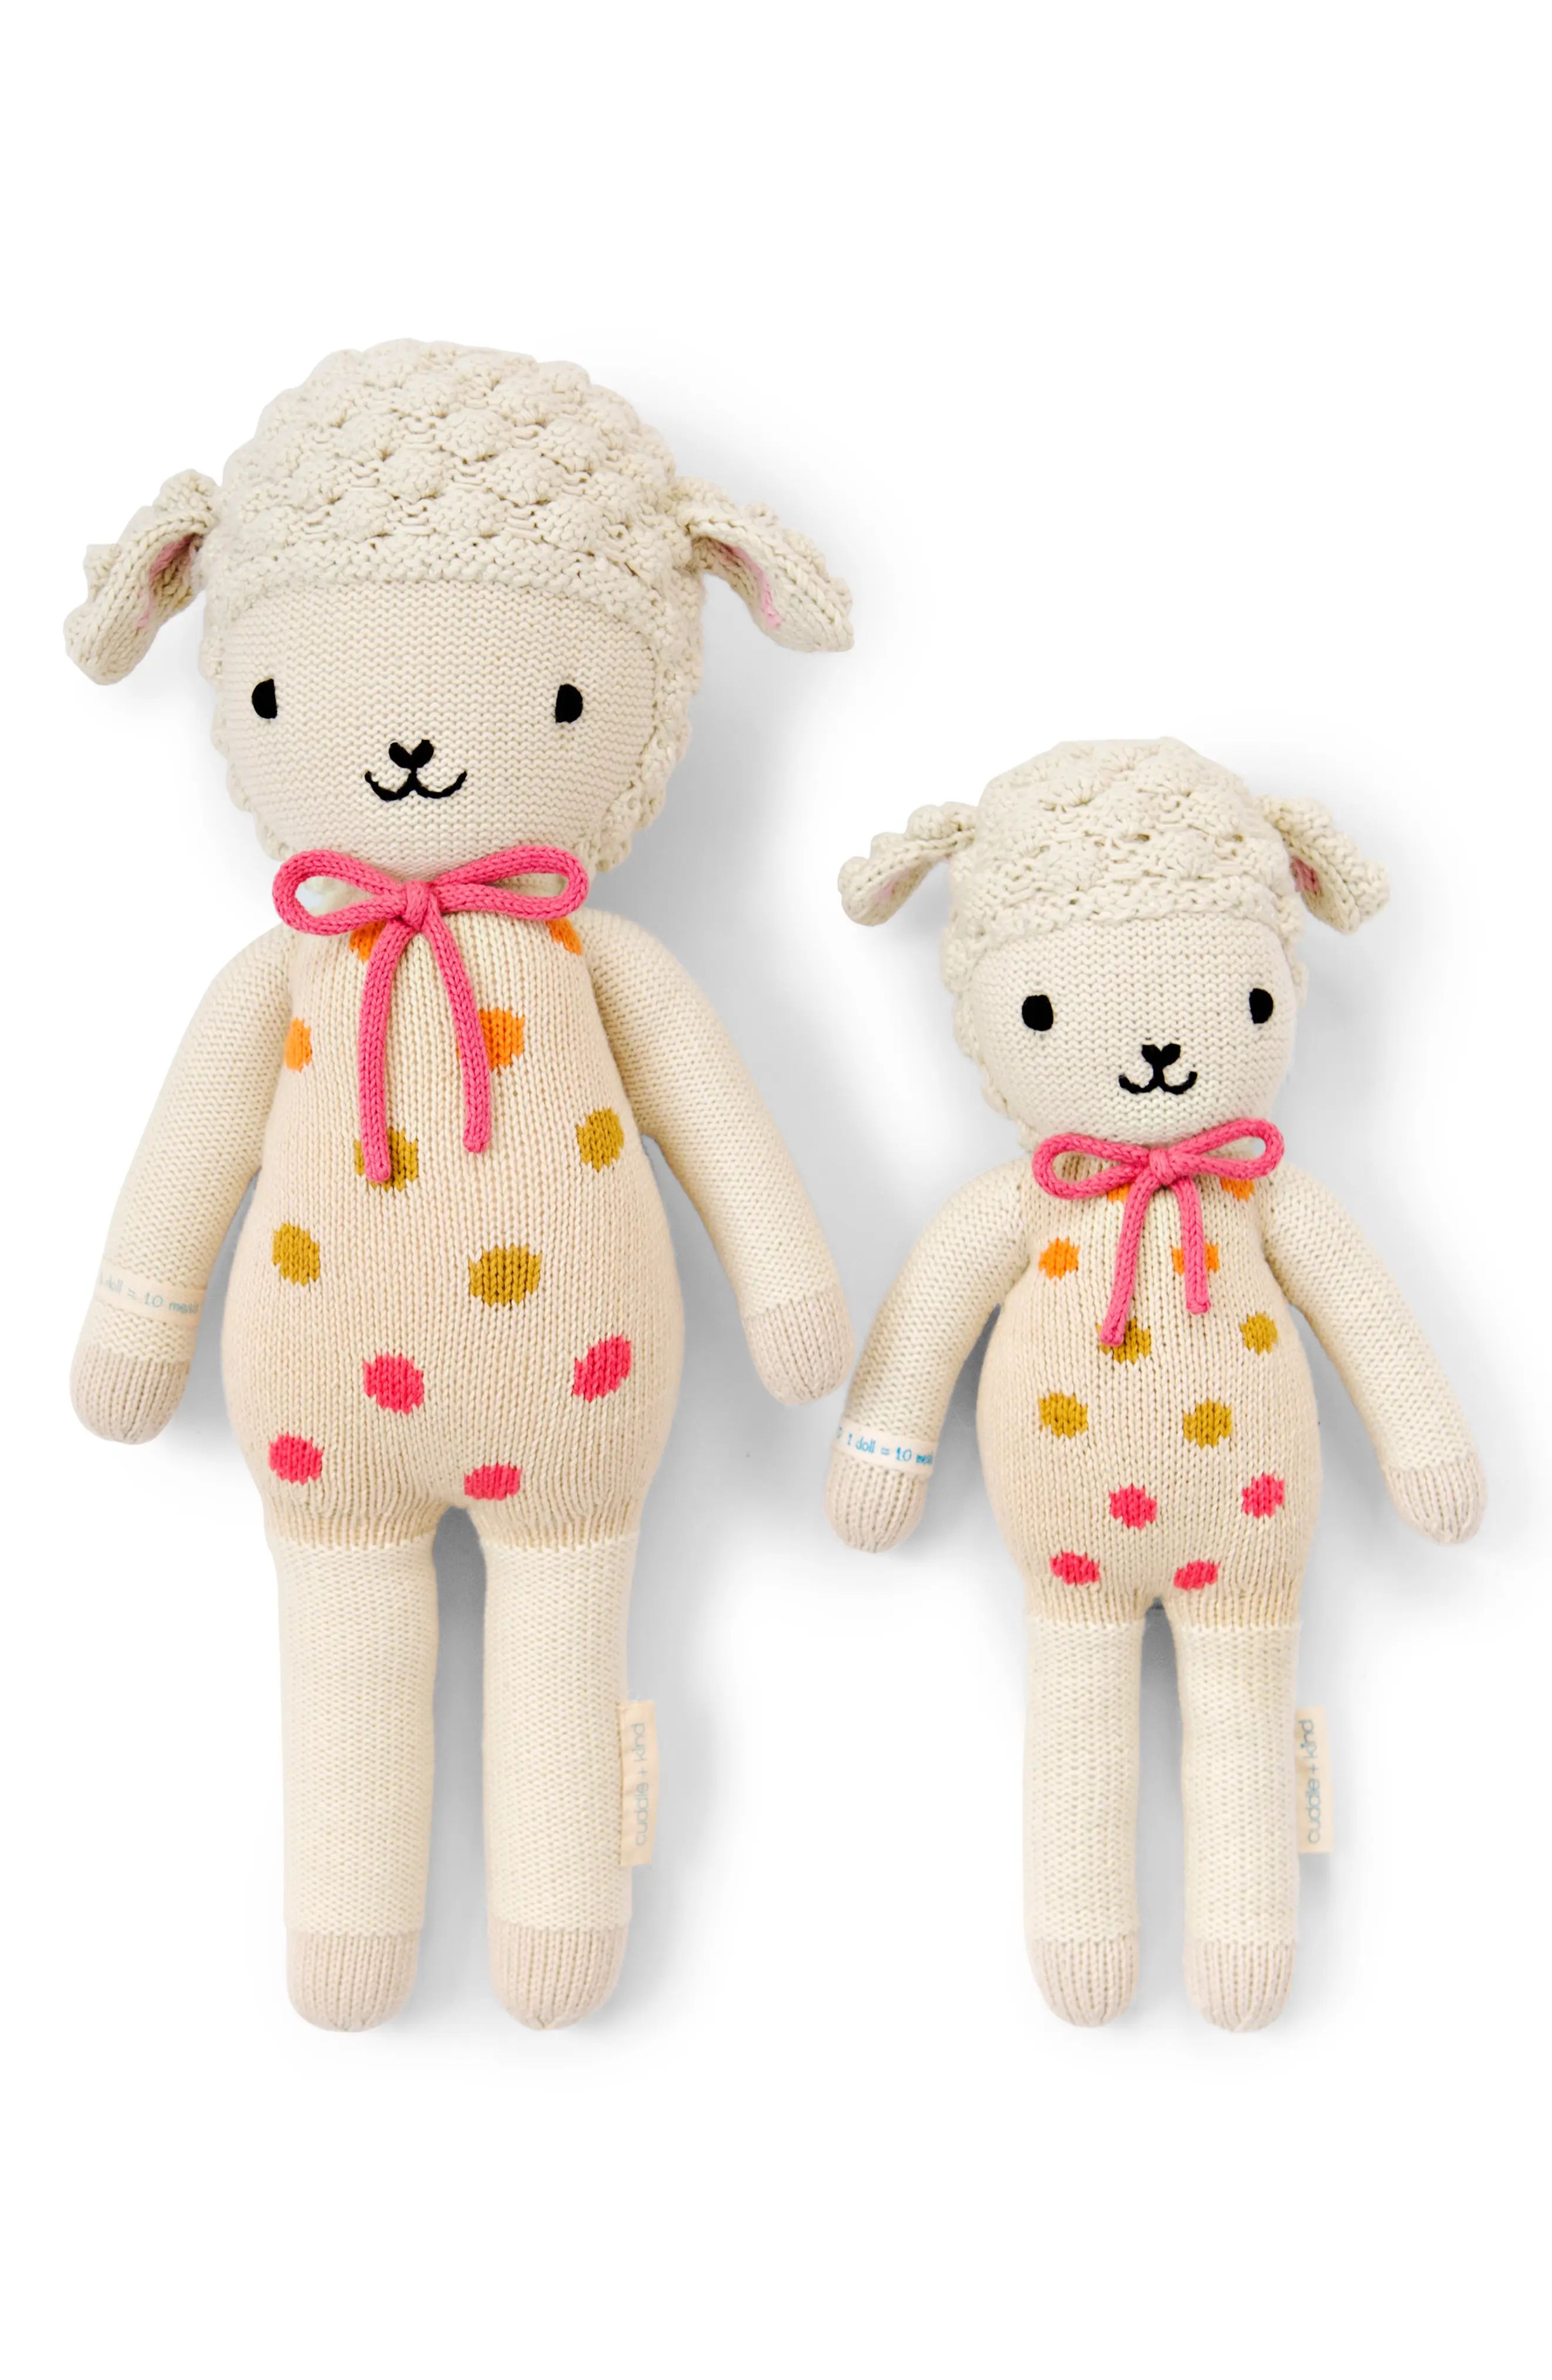 cuddle+kind cuddle + kind Lucy the Lamb Stuffed Animal in White at Nordstrom, Size Regular | Nordstrom